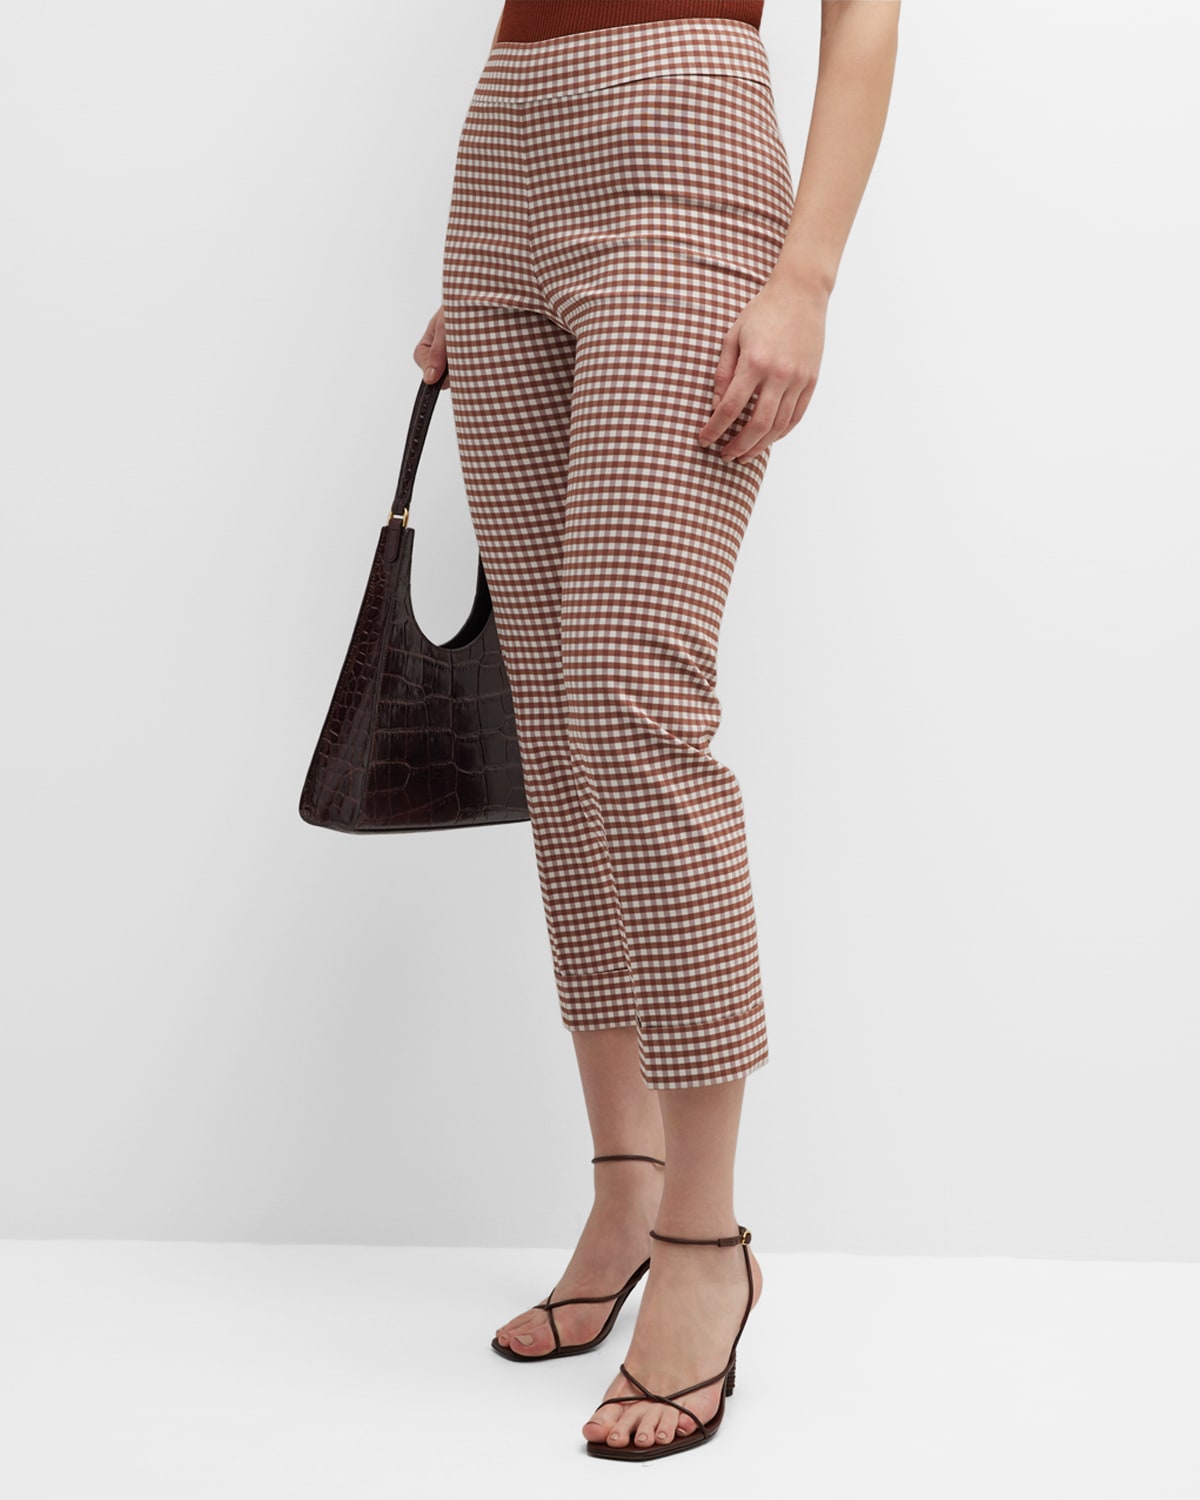 Avenue Montaigne Cropped Skinny Gingham-Print Pants